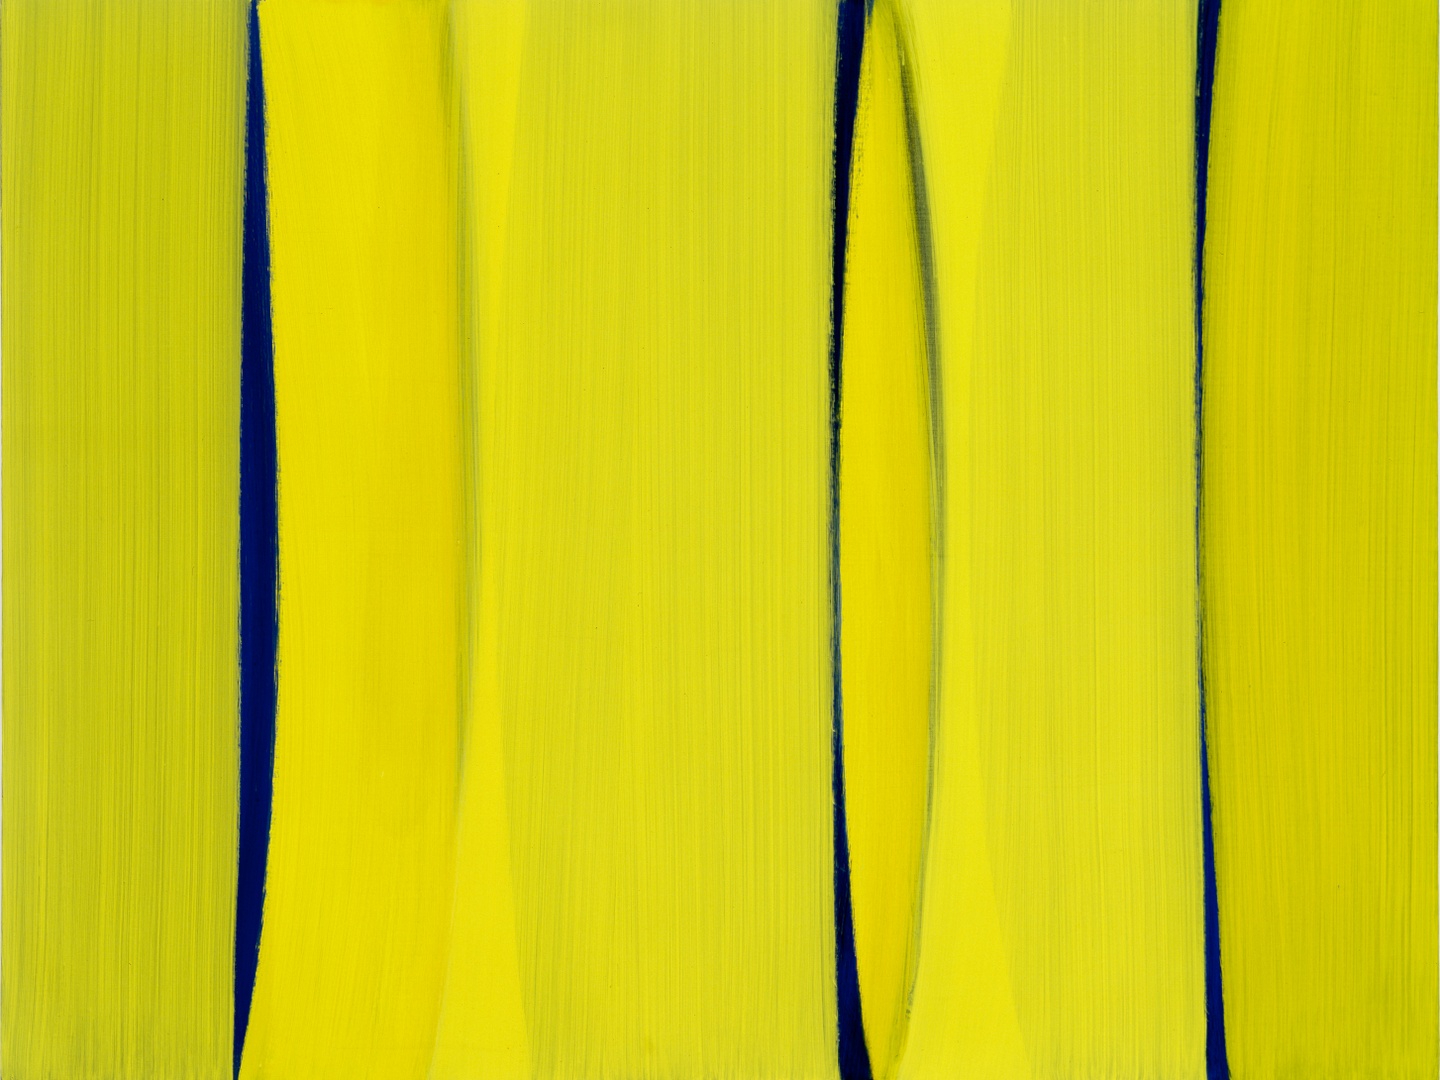 An abstract painting of yellow vertical bands of color on top of a dark blue field